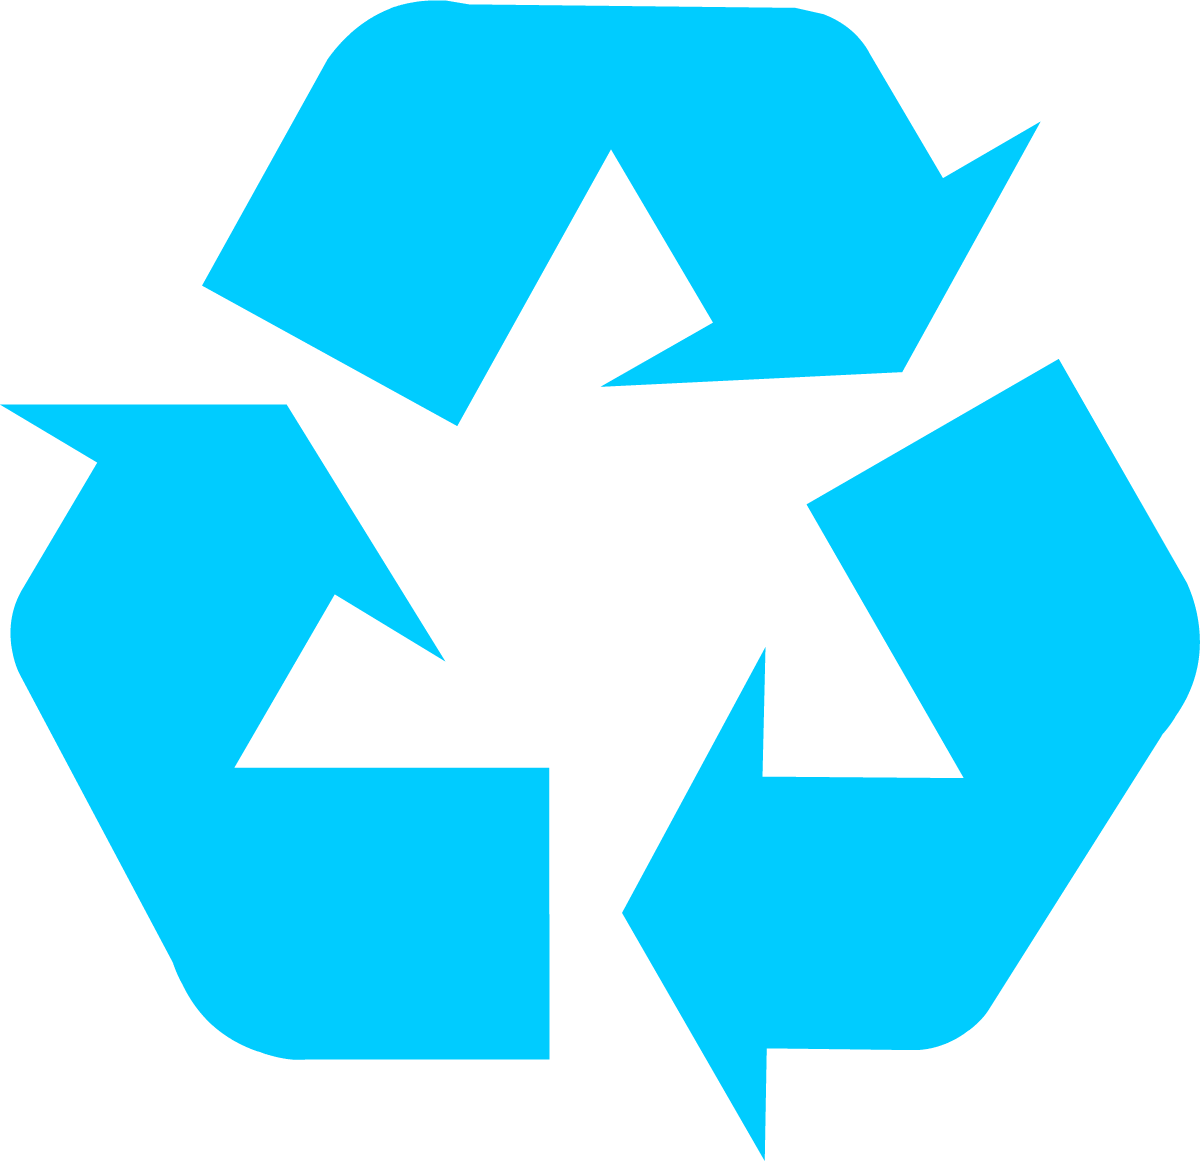 Teal Colored Logo - Recycling Symbol - Download the Original Recycle Logo